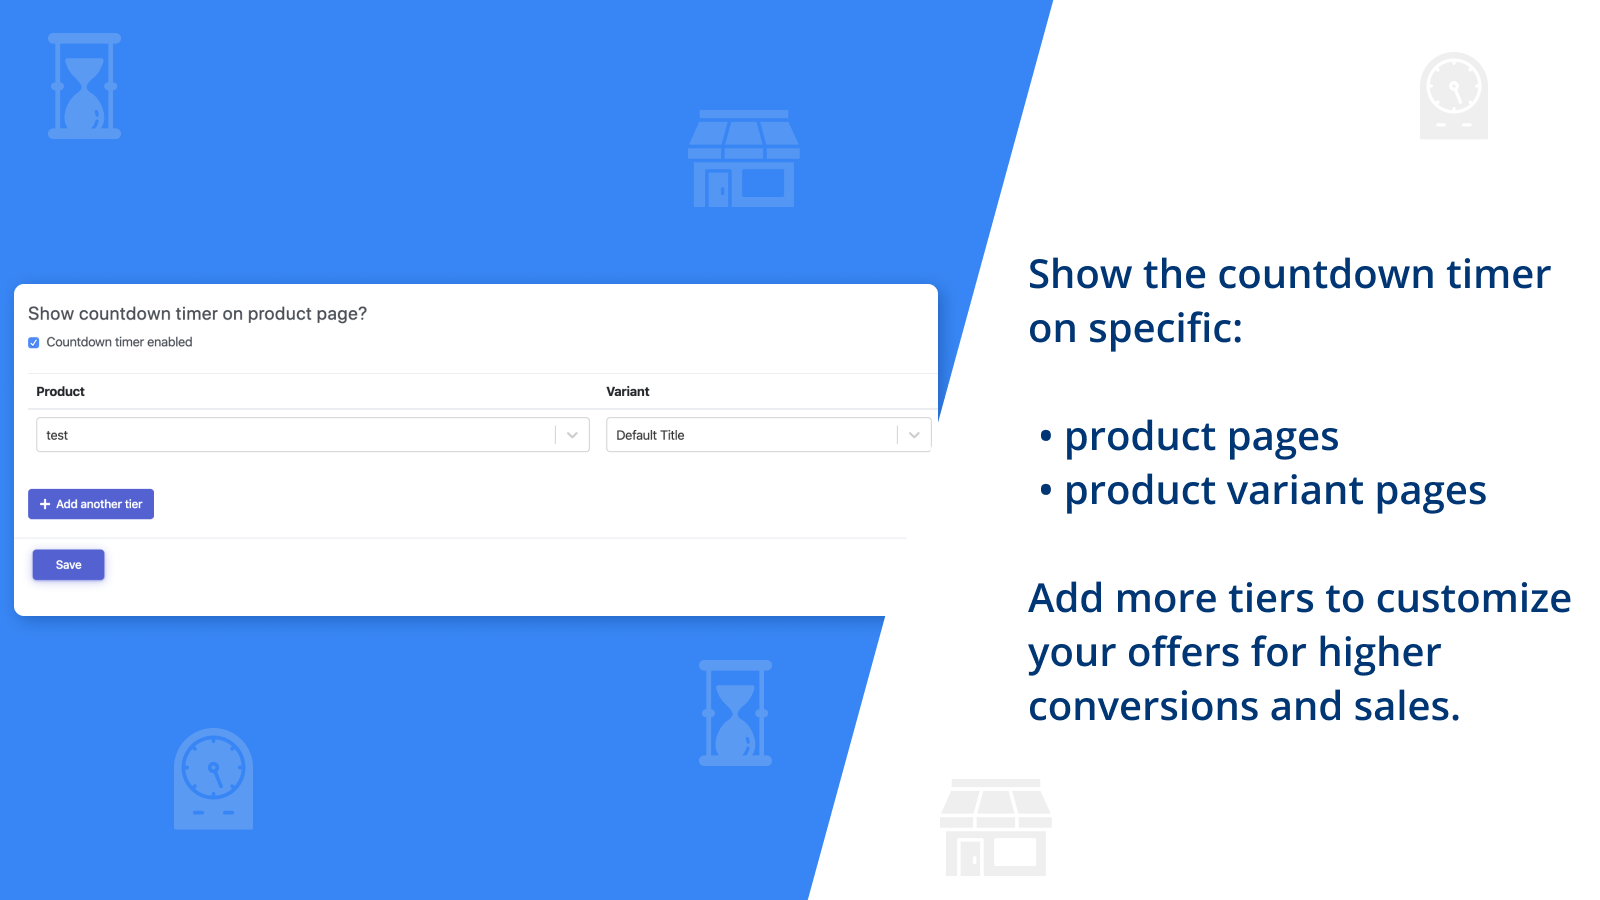 Choose the product page or product variant for countdown timer